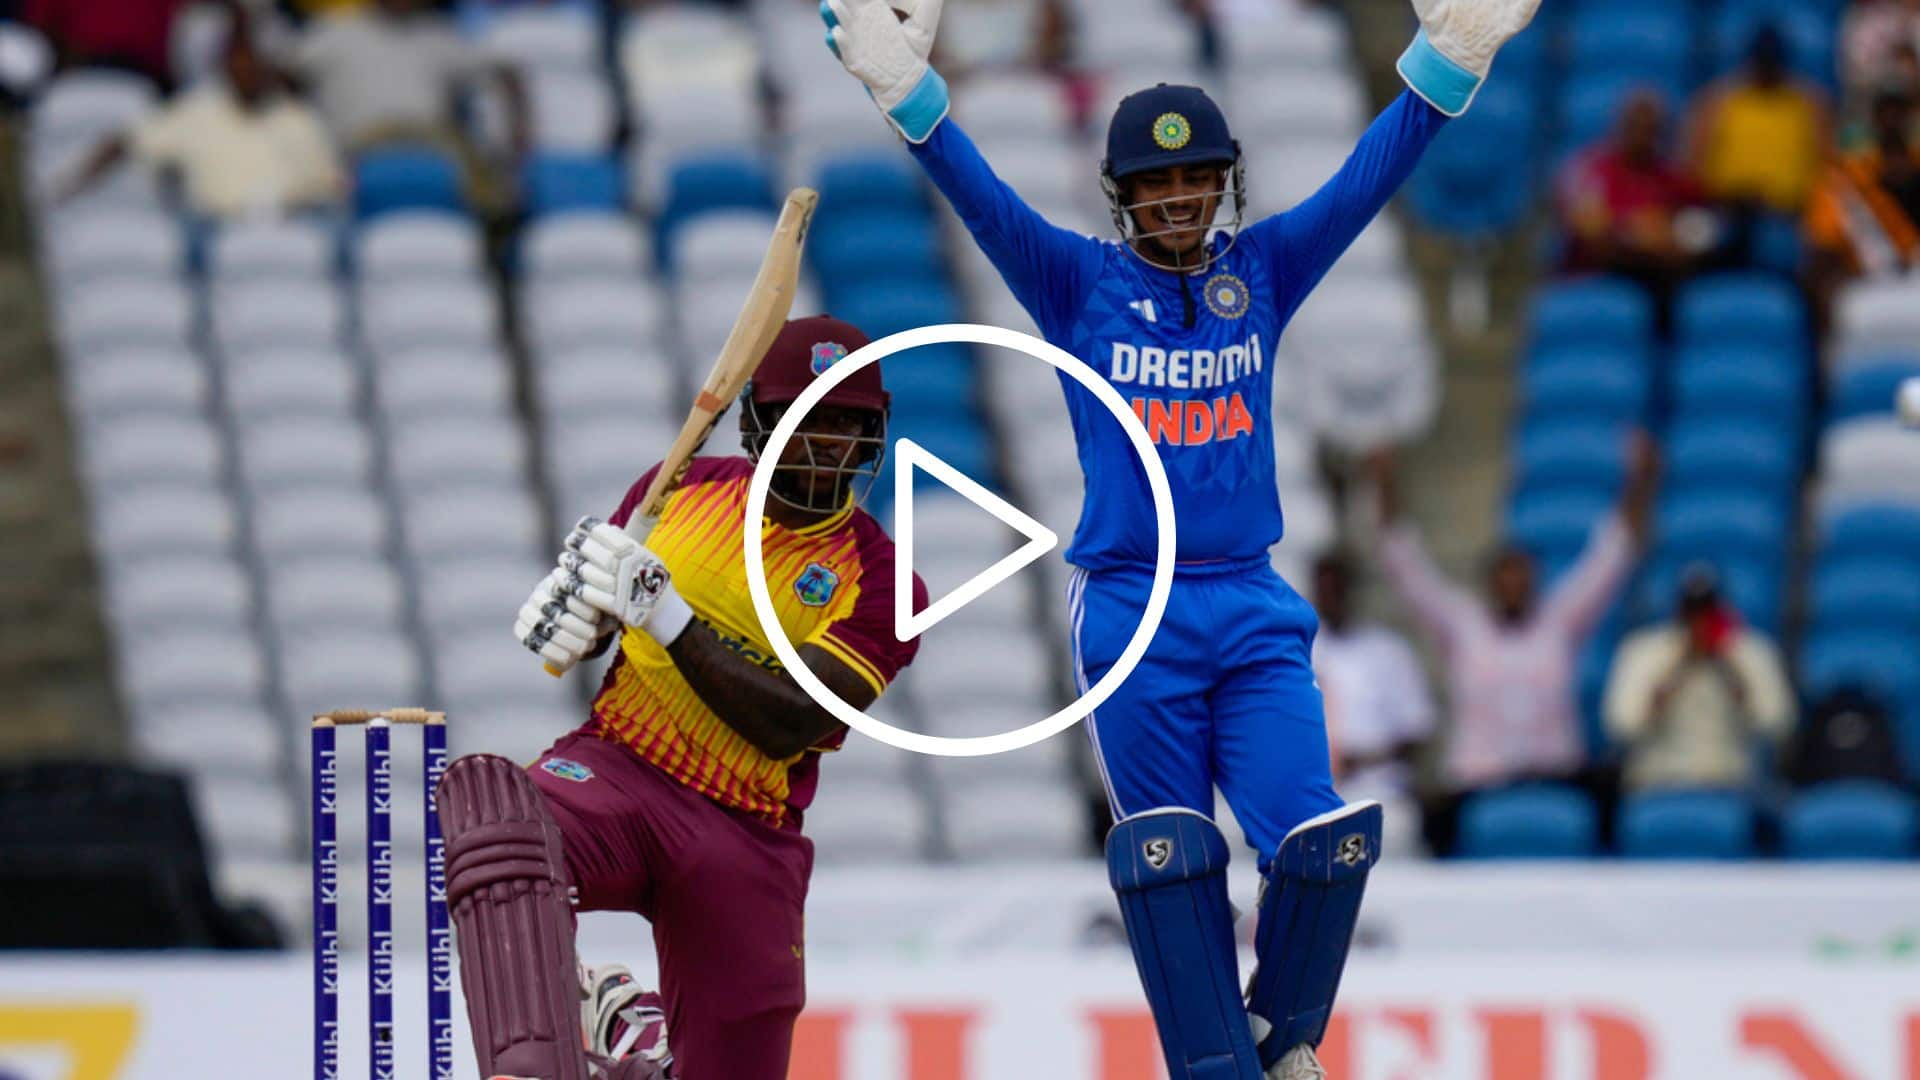 [Watch] Yuzvendra Chahal's Mighty Double Blow Rattle Windies In His First Over